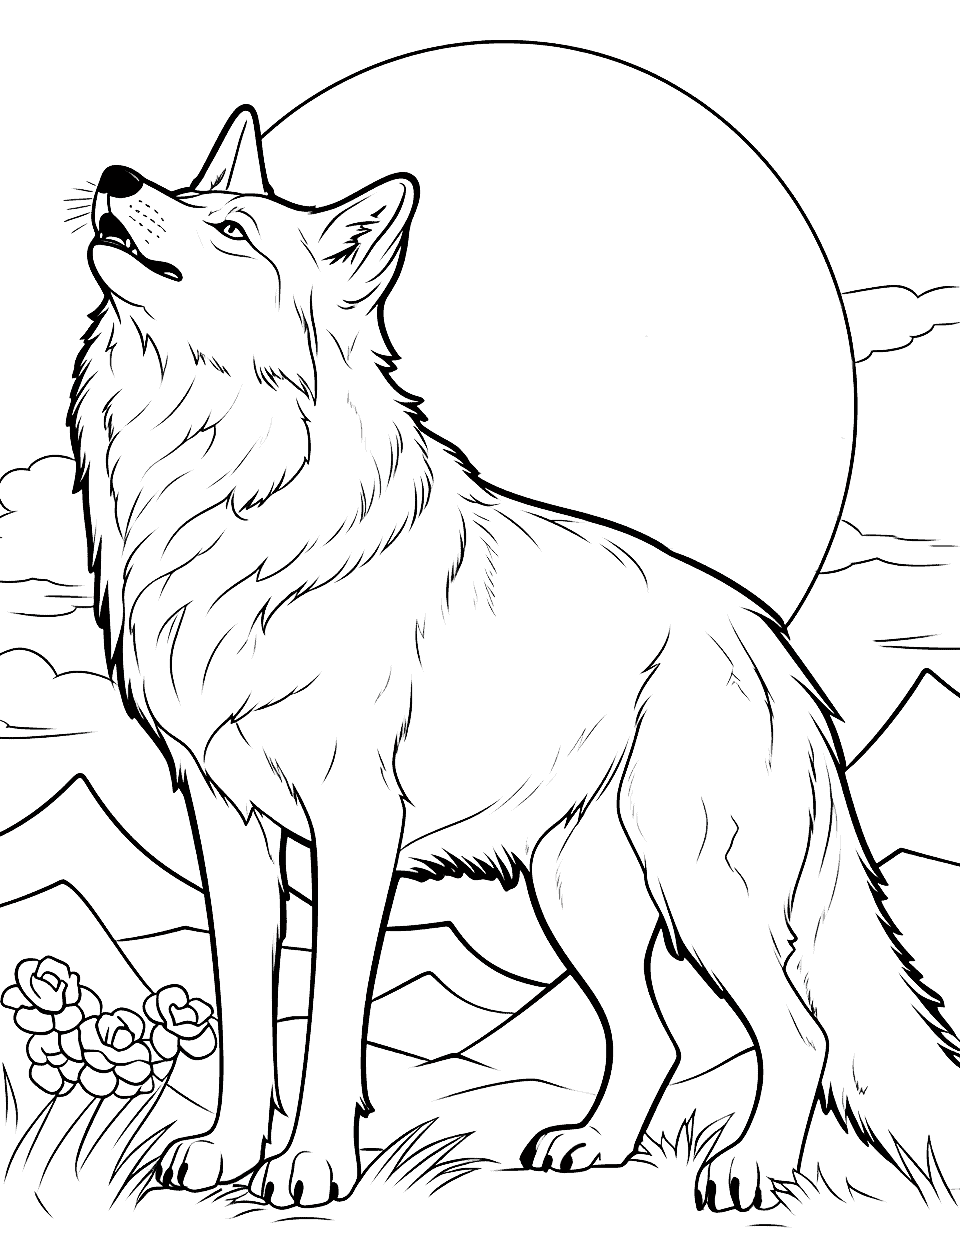 Female Wolf's Night Wolf Coloring Page - A beautiful she-wolf gazing up at the moon, her fur adorned with night flowers.